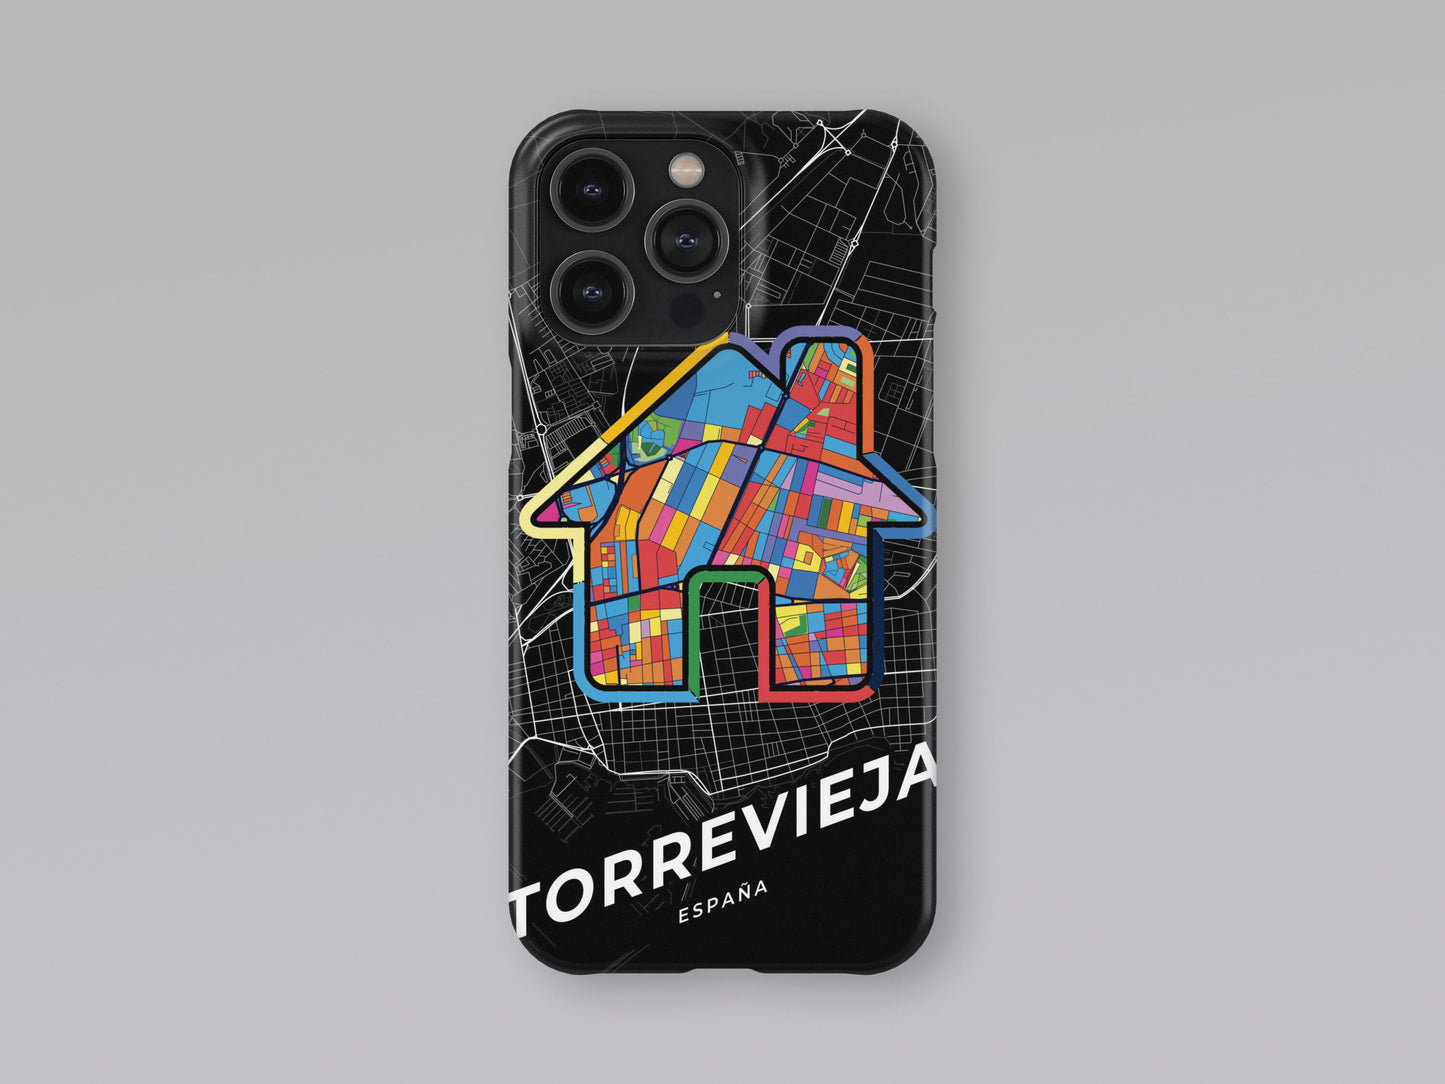 Torrevieja Spain slim phone case with colorful icon 3